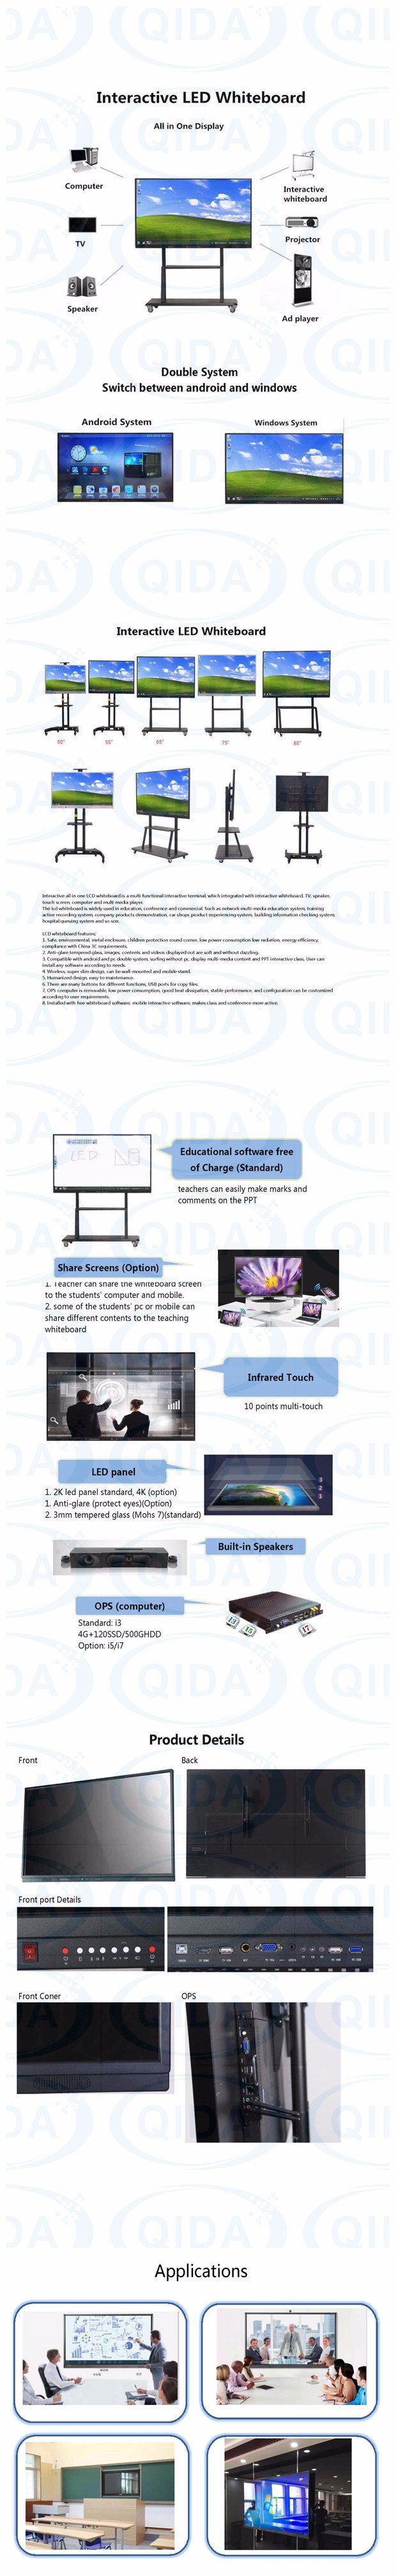 4K UHD LED Display Whiteboard Interactive Boards with Touch Panel Displays for Teaching